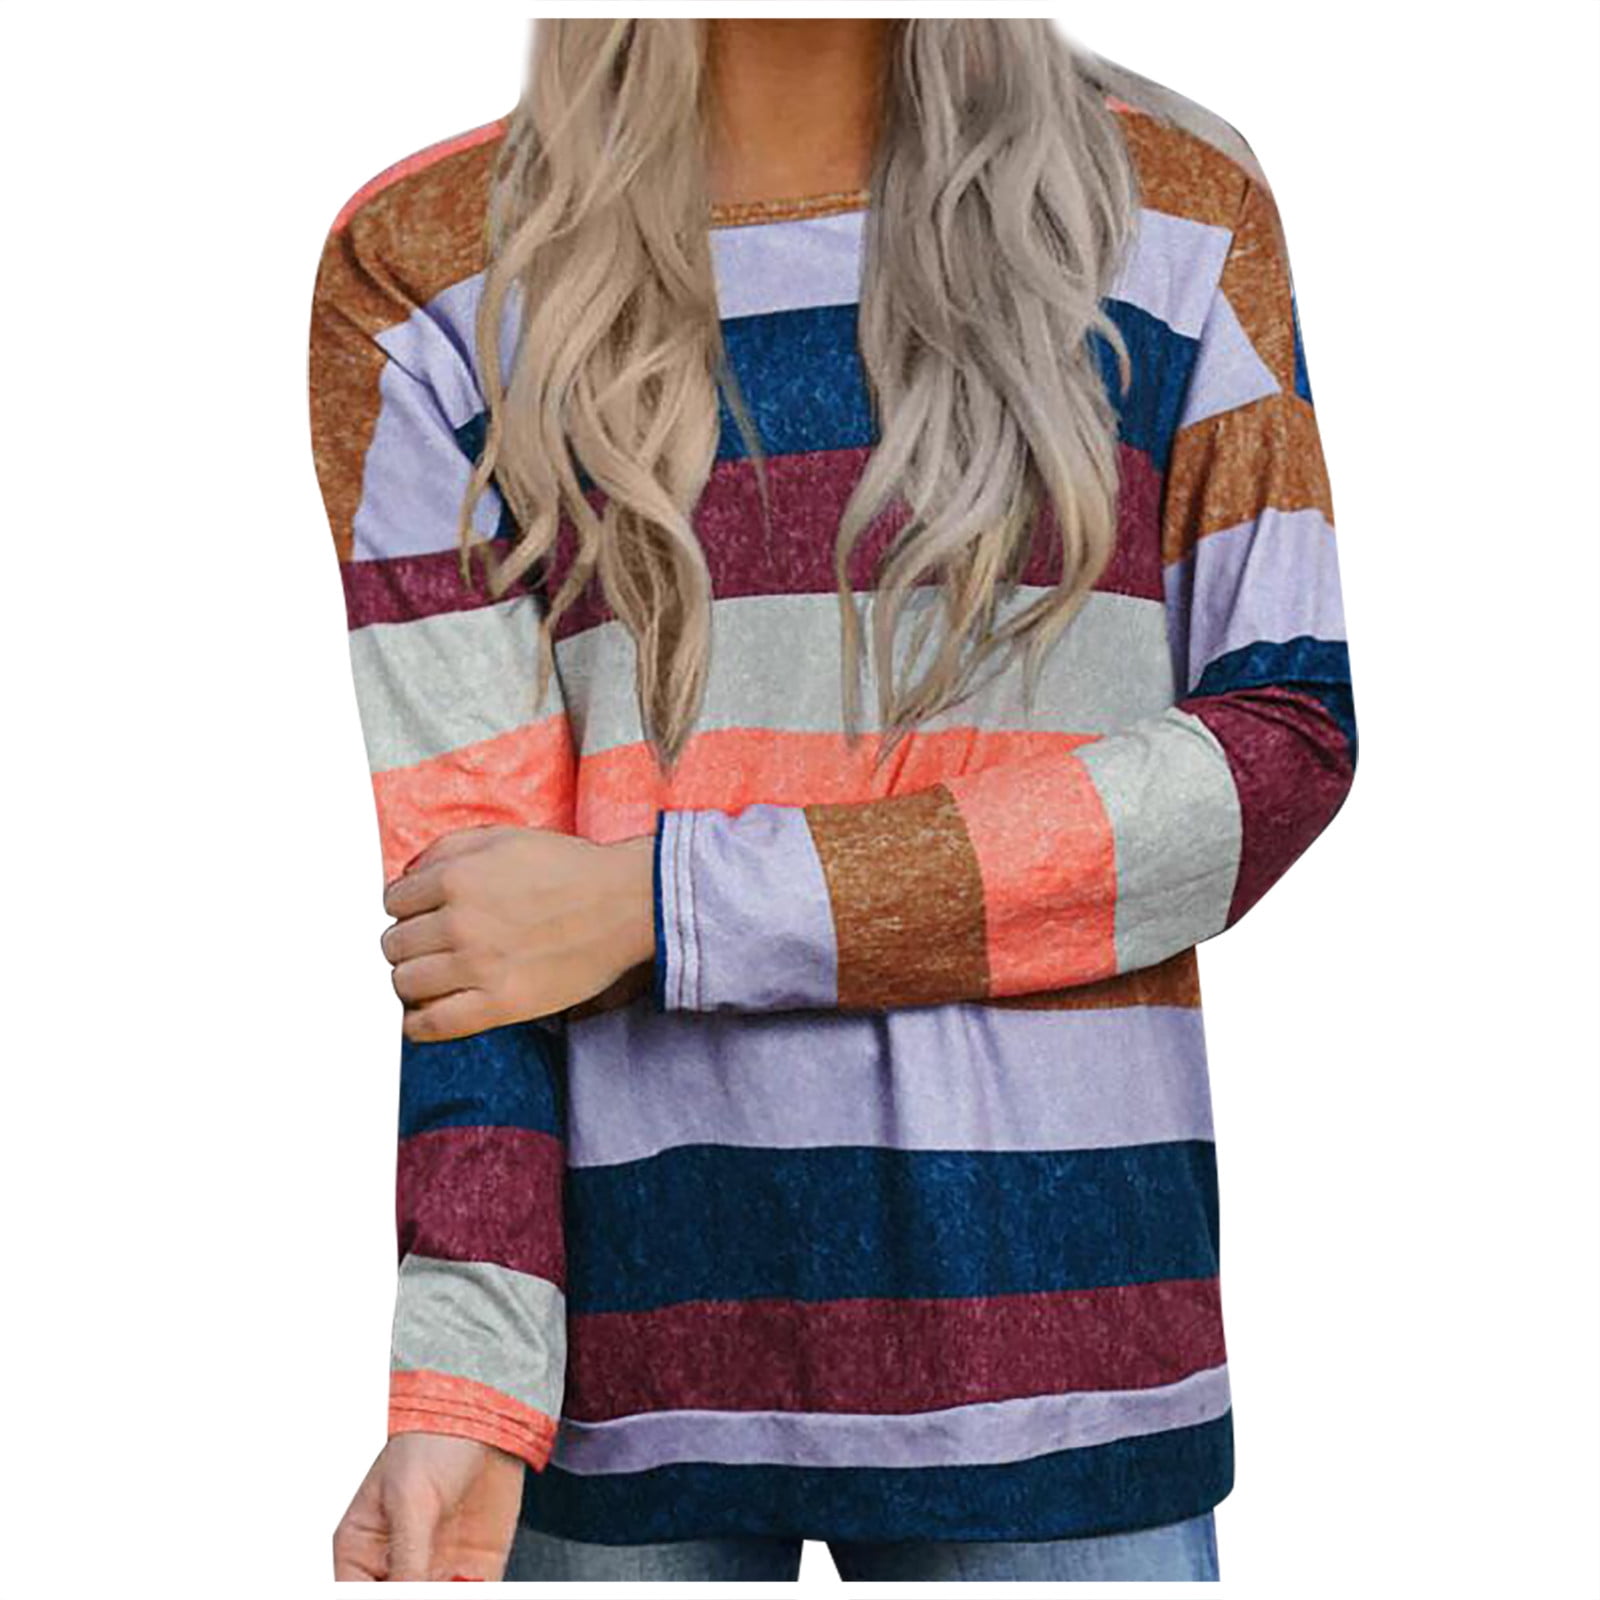 Womens Tops and Blouses Plus Size Top for Women Casual Loose Fit Long Sleeve Striped Sweatshirts 